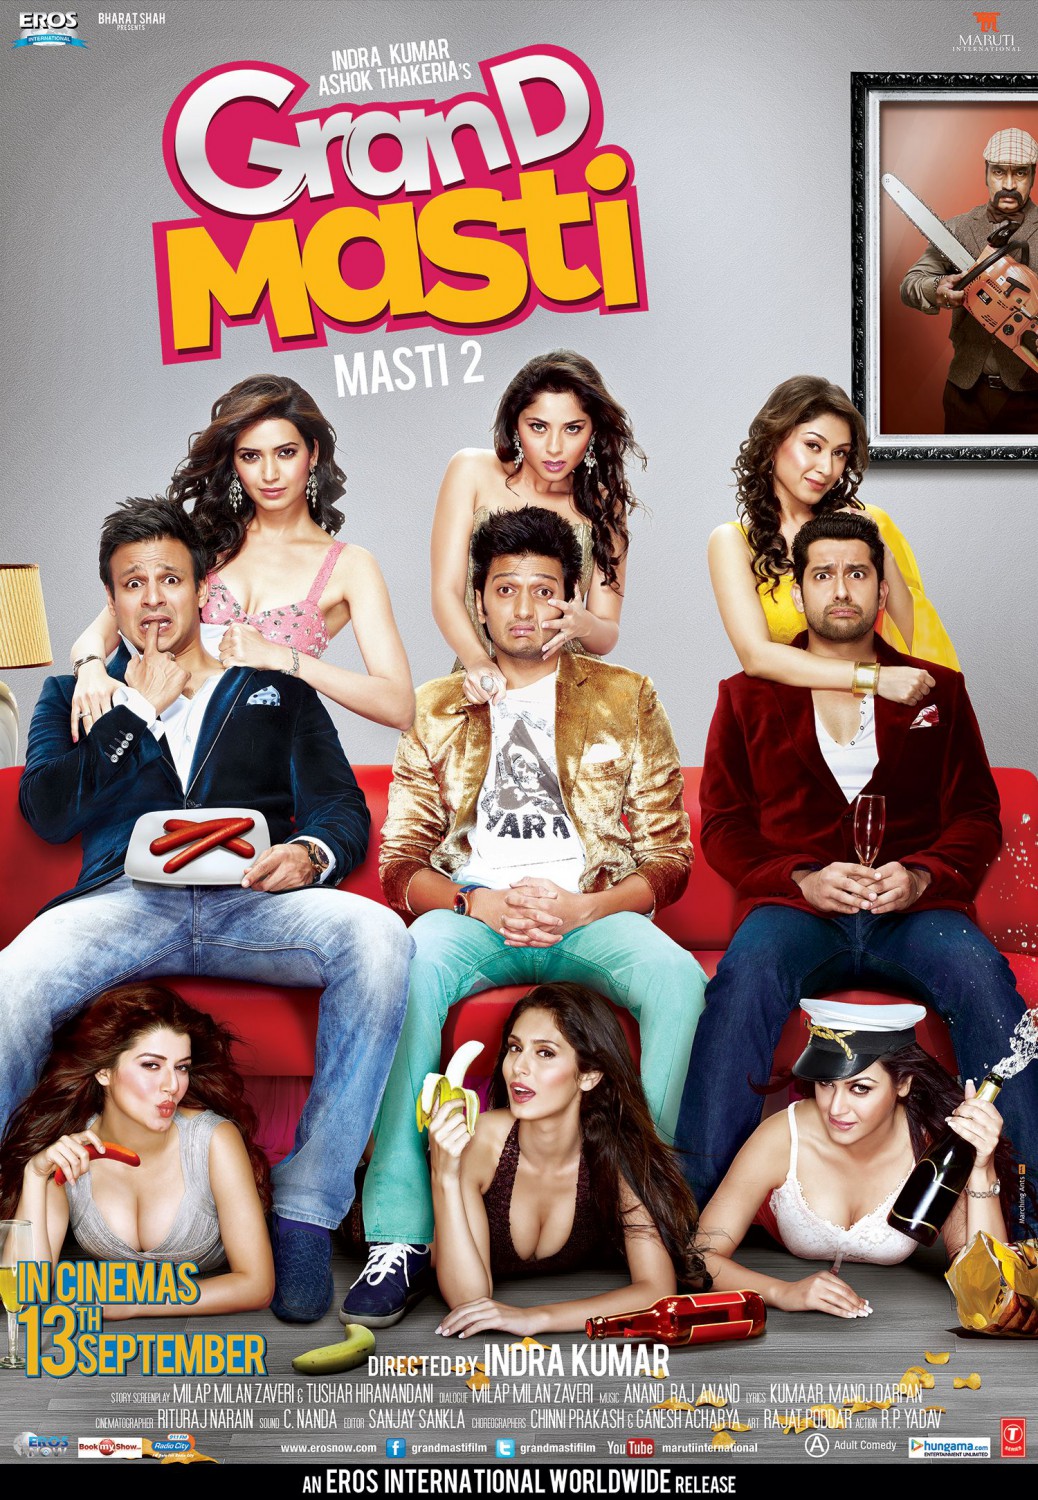 Extra Large Movie Poster Image for Grand Masti (#4 of 4)